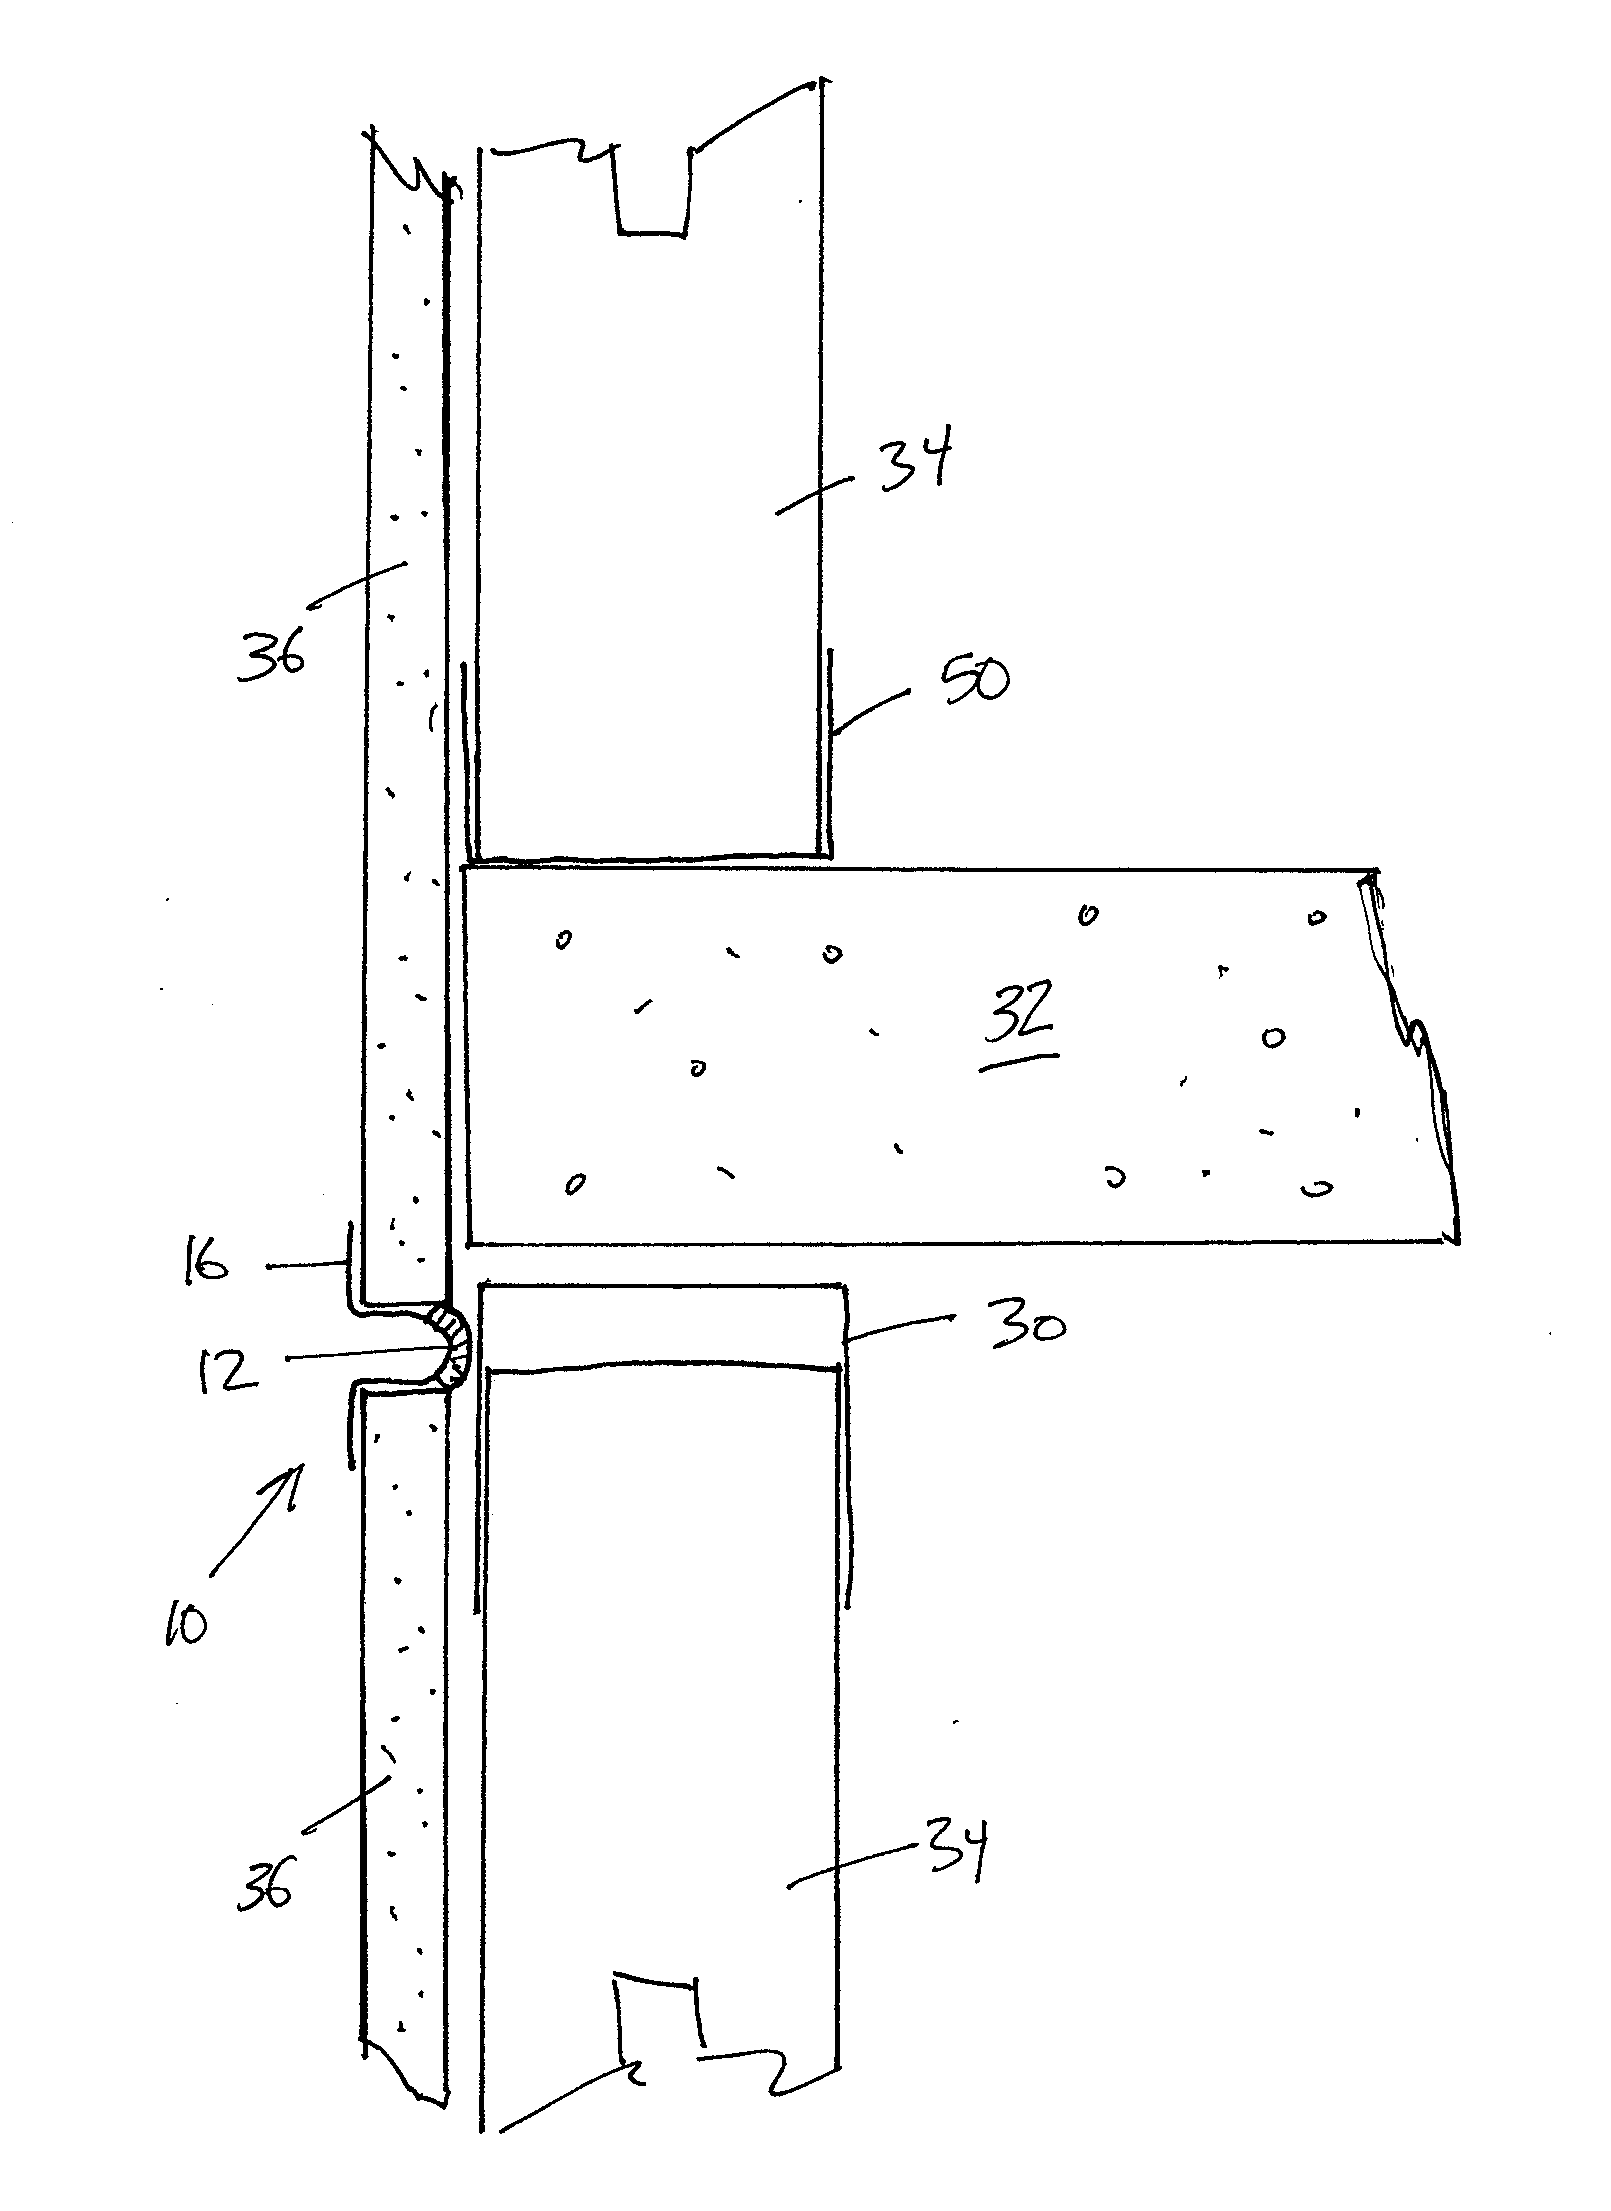 Wall gap fire block device, system and method